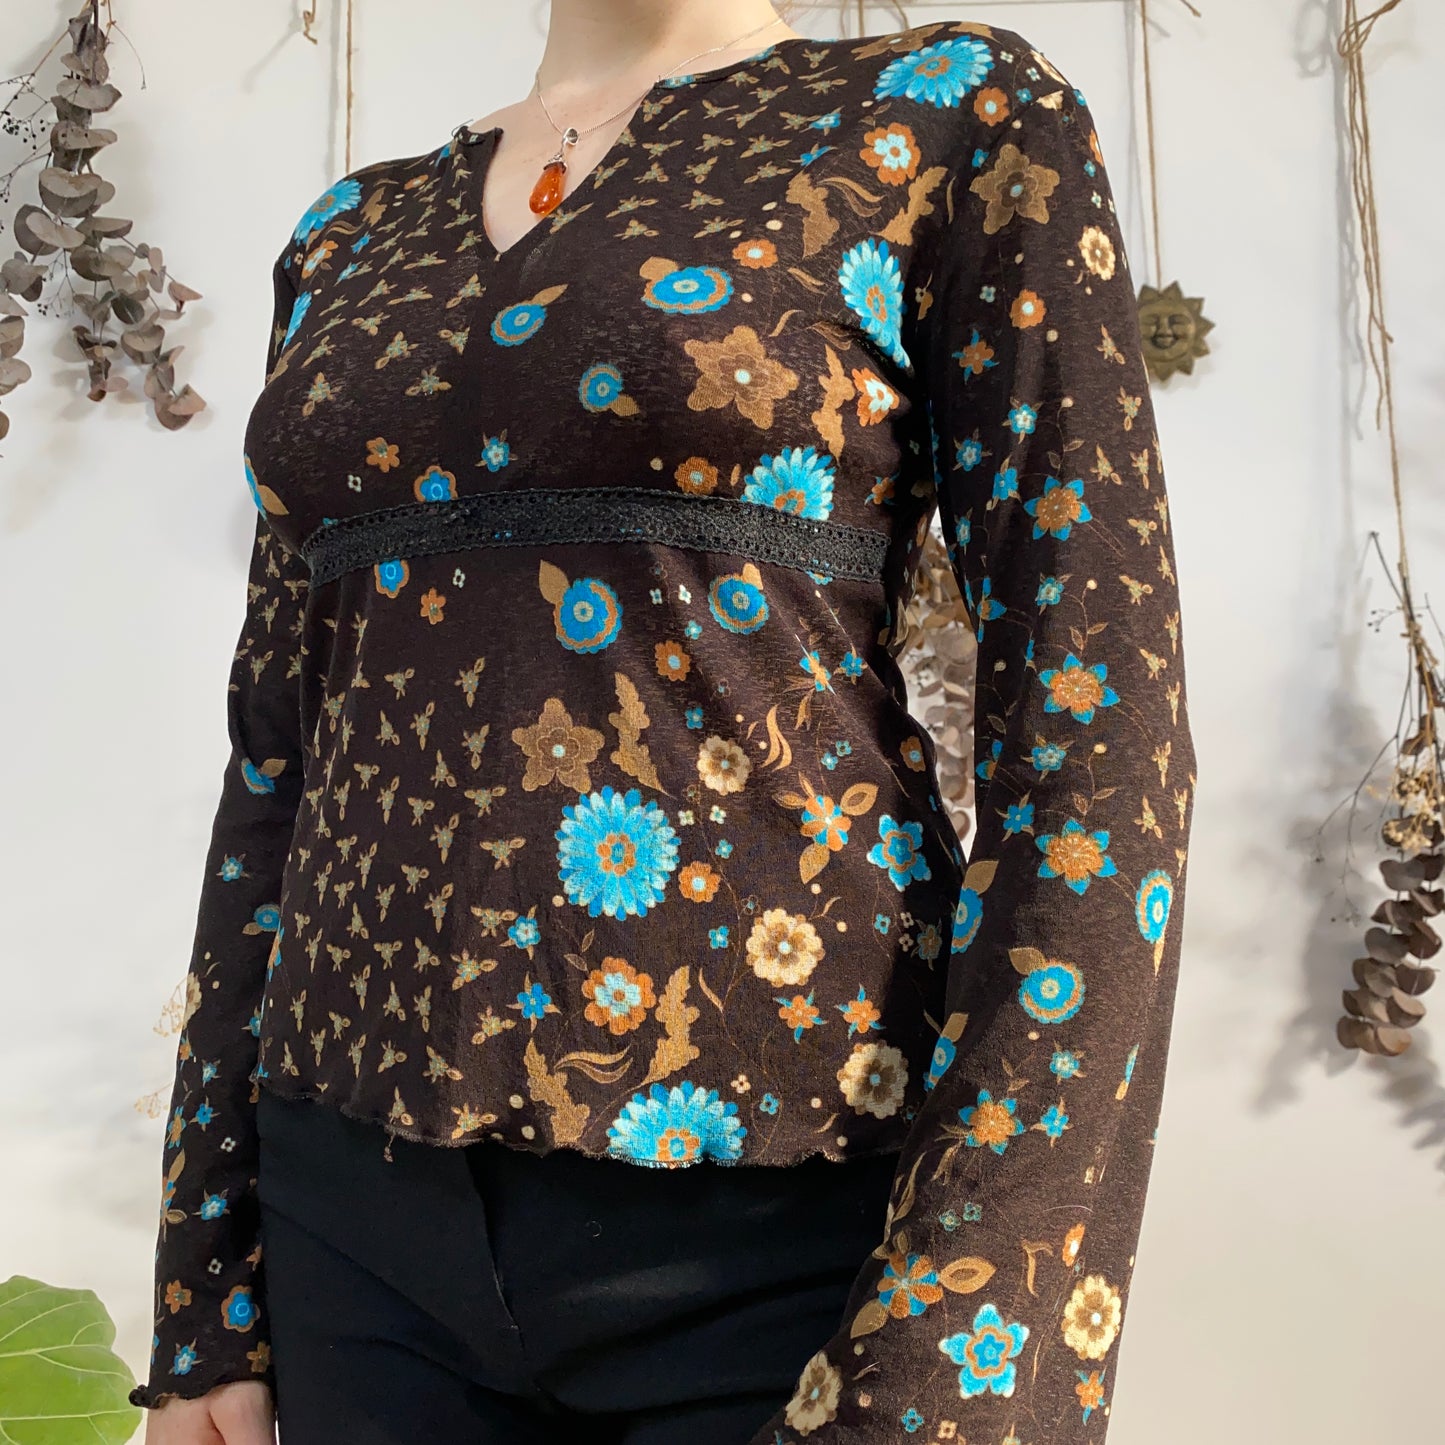 Brown floral mesh top - size M